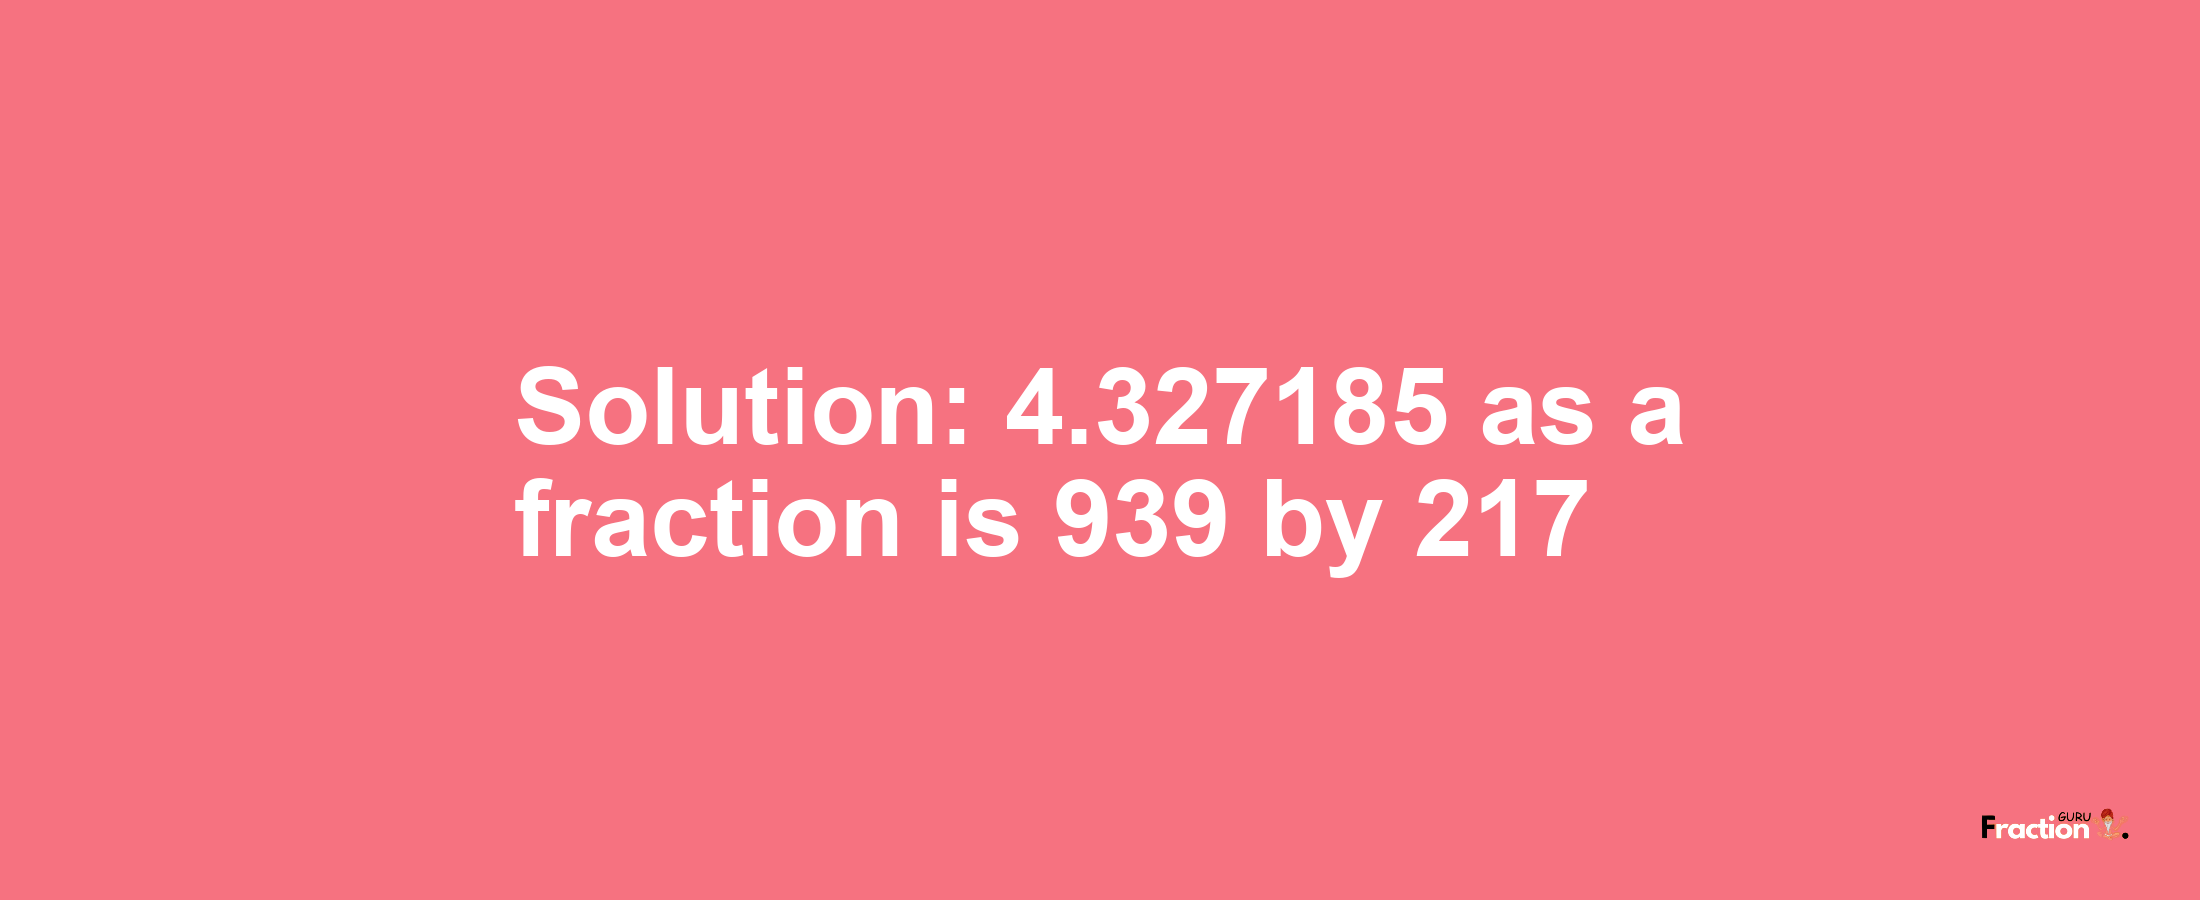 Solution:4.327185 as a fraction is 939/217